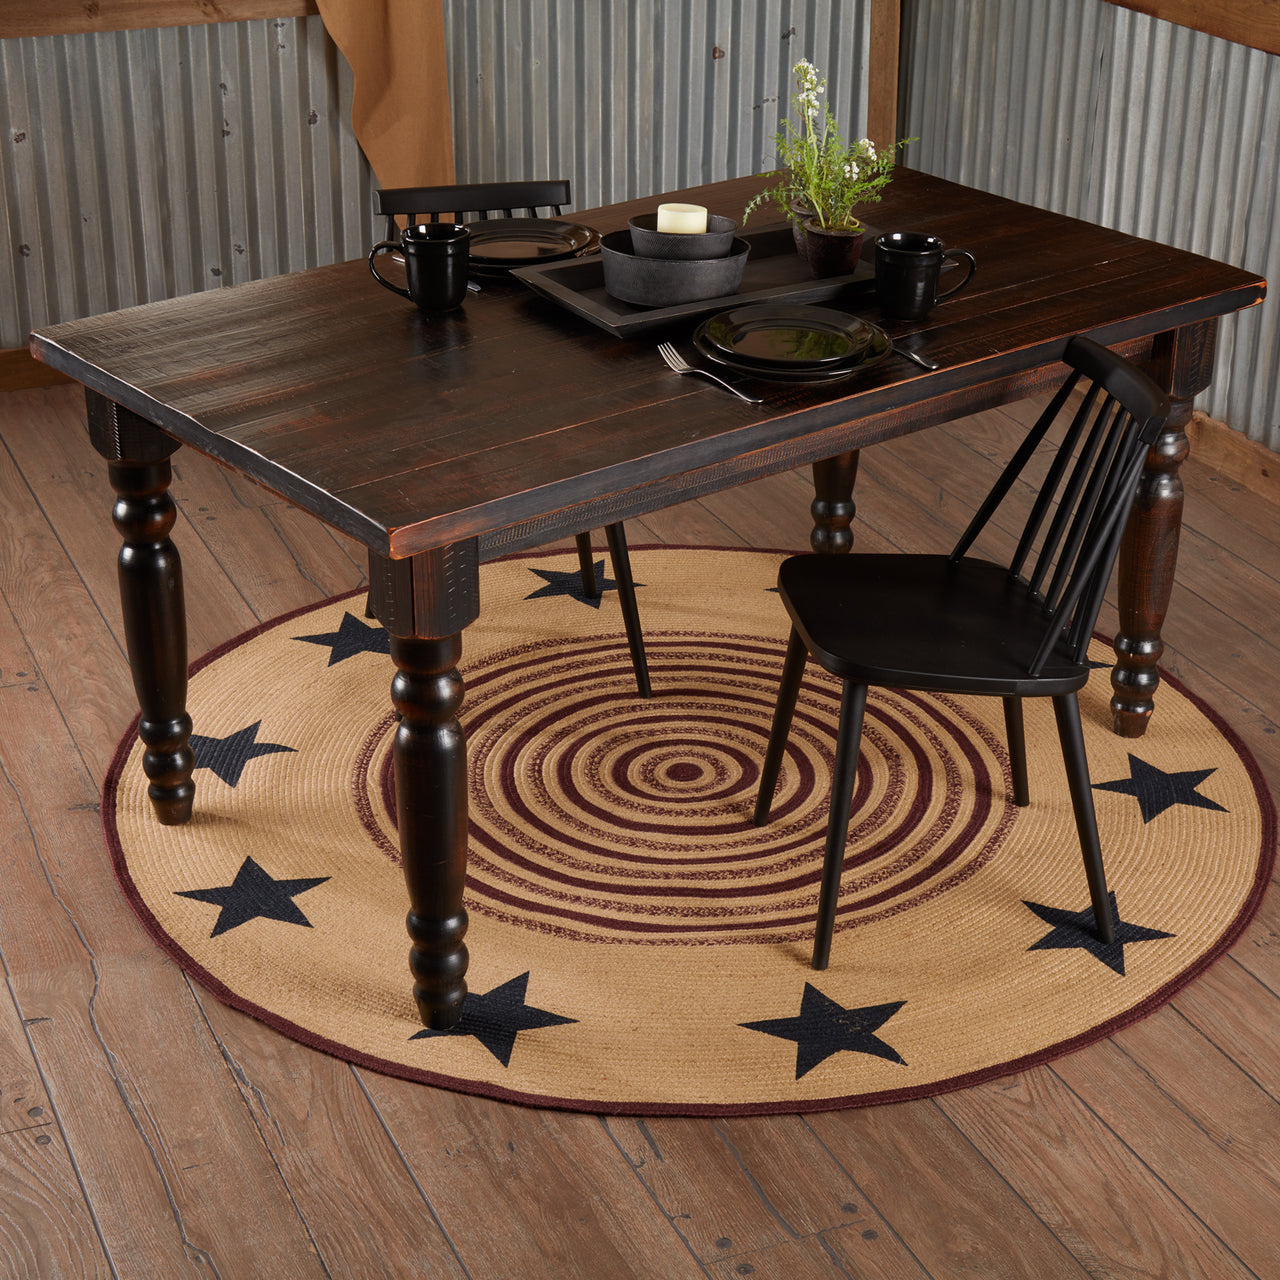 Potomac Jute Braided Rug Round Stencil Stars 6ft with Rug Pad VHC Brands